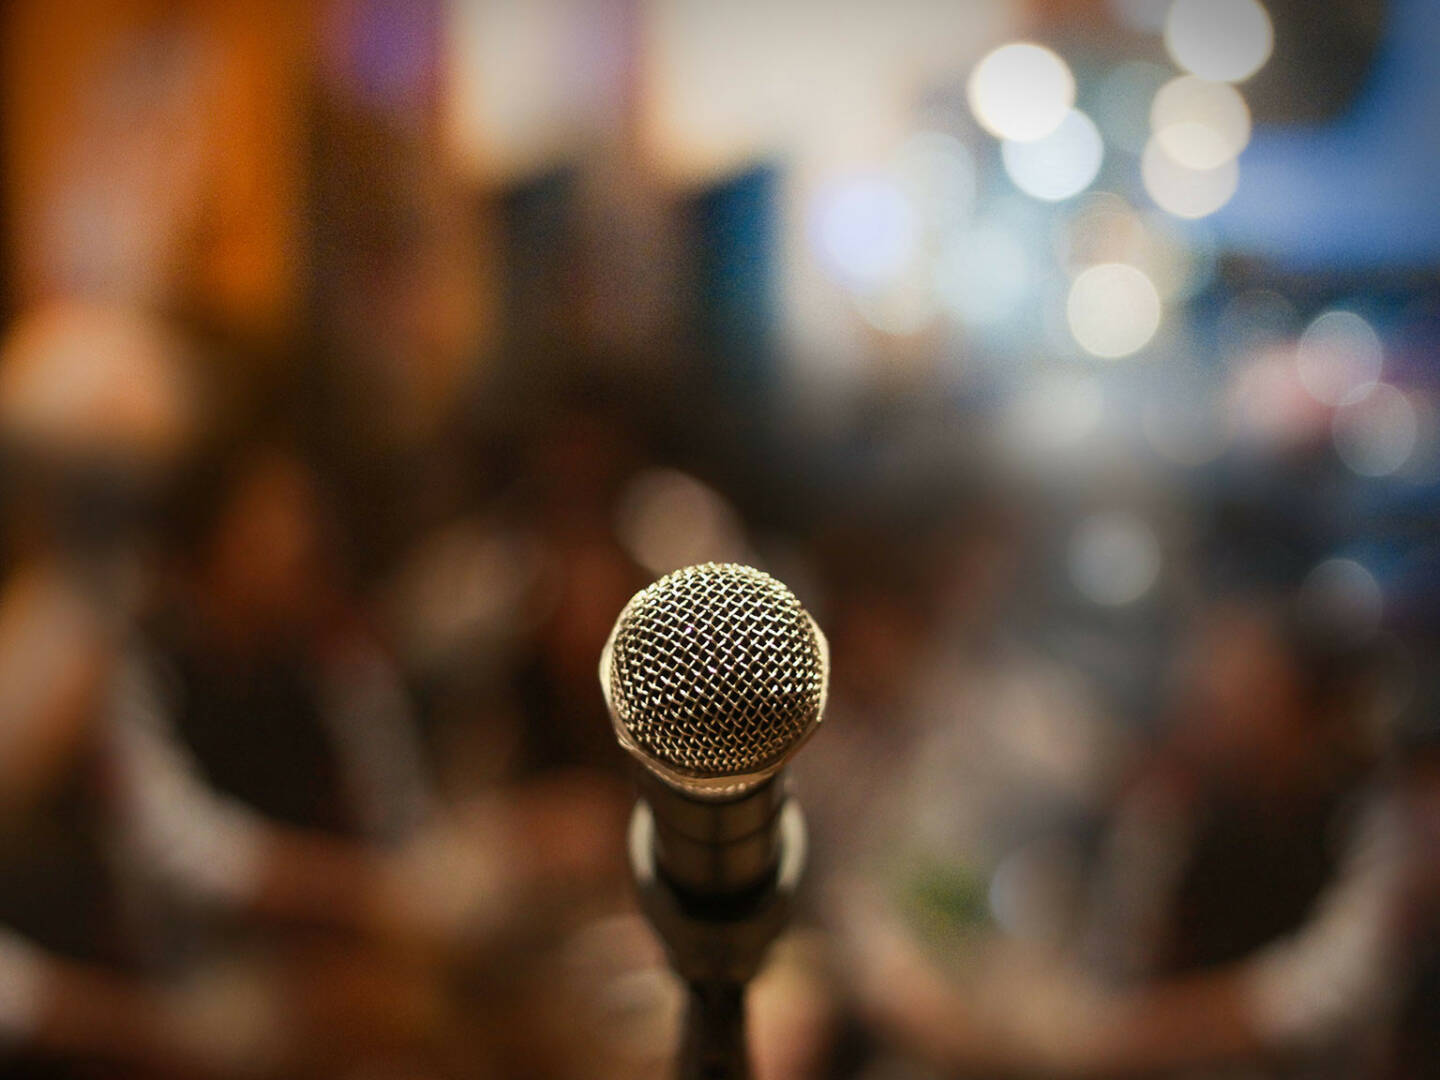 Mikrofon, http://www.shutterstock.com/de/pic-174548207/stock-photo-close-up-of-microphone-in-concert-hall-or-conference-room.html